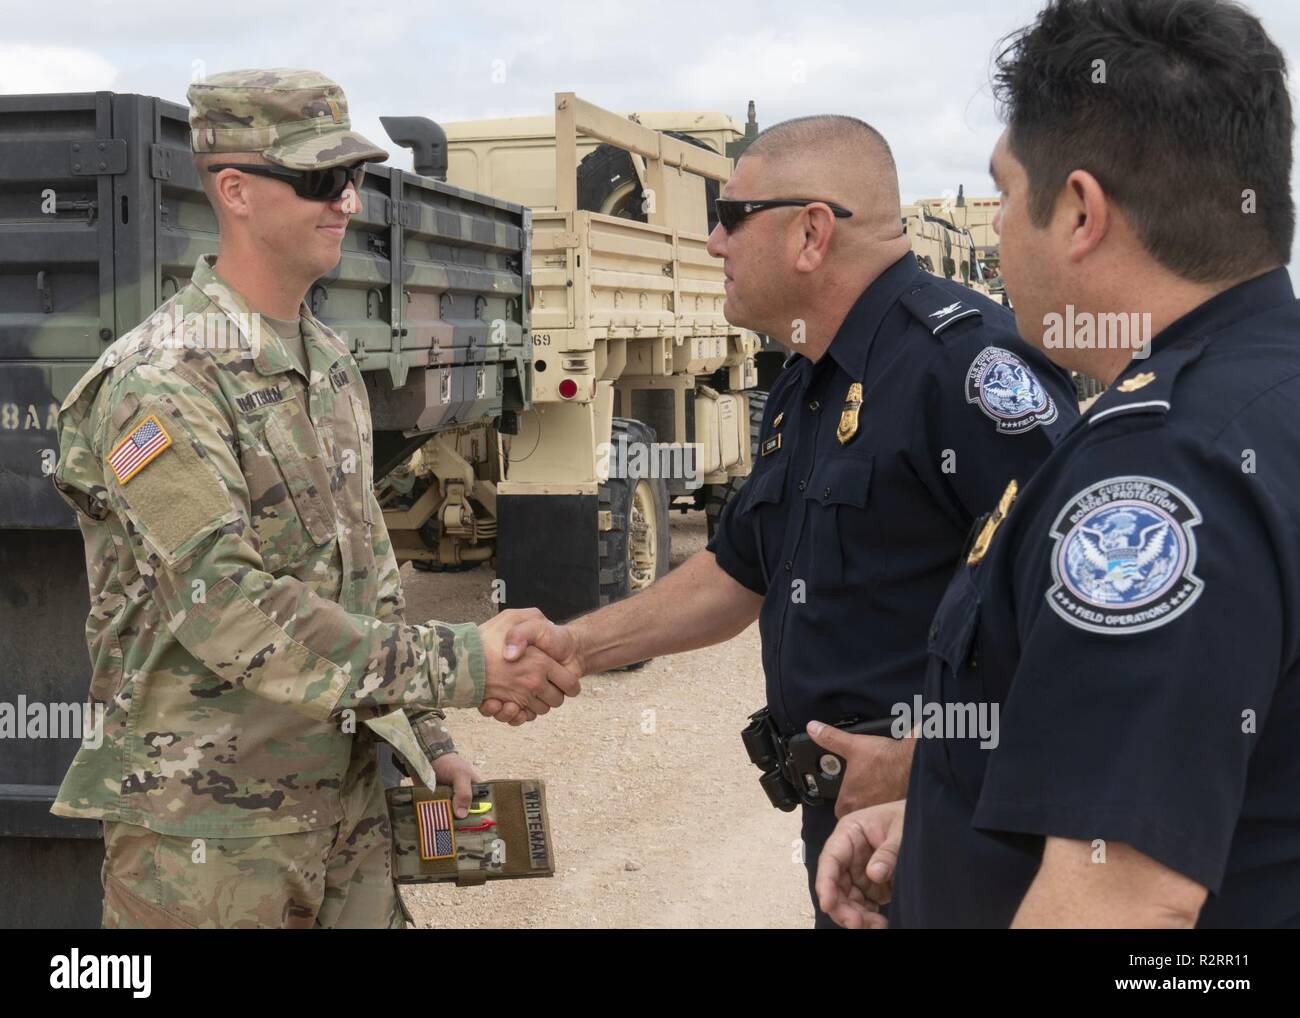 2nd Lt. Paul Whiteman, a Prince George County, Virginia native and engineer platoon leader with the 887th Engineer Support Company, 19th Engineer Battalion, shakes hands with Port Director Jorge Galvan and supervisory Customs and Border Patrol officer Victor Garcia after showing them the life sustainment base, Nov. 5 in Donna, Texas. U.S Northern Command is providing military support to the Department of Homeland Security and U.S. Customs and Border Protection to secure the southern border of the United States. Stock Photo